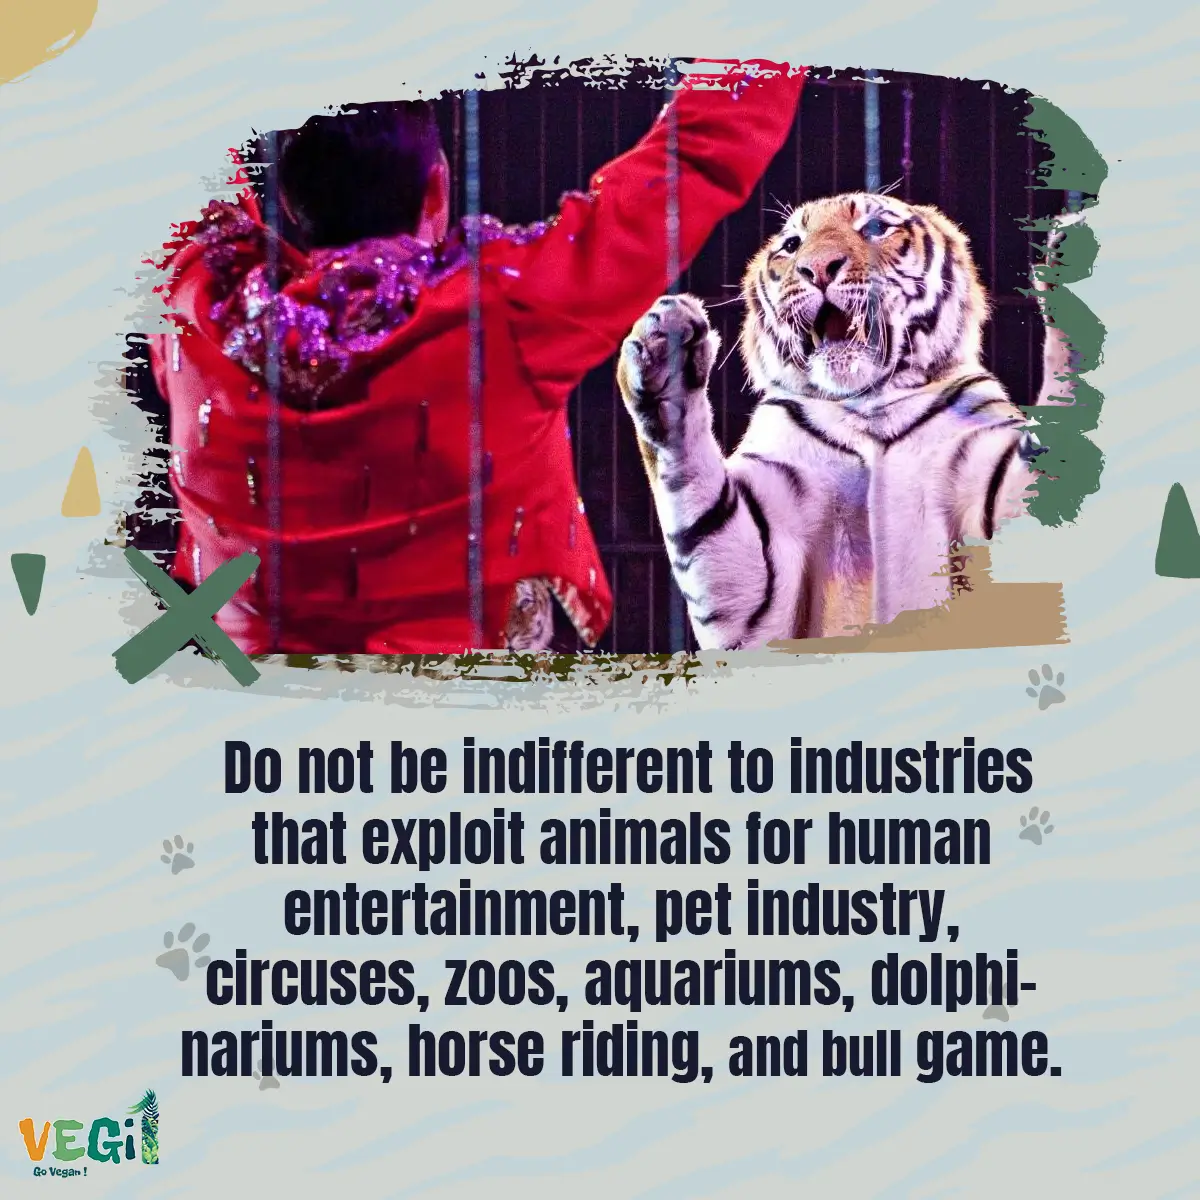 Do not be indifferent to industries that exploit animals for human entertainment, pet industry, circuses, zoos, aquariums, dolphinariums, horse riding, and bull game.